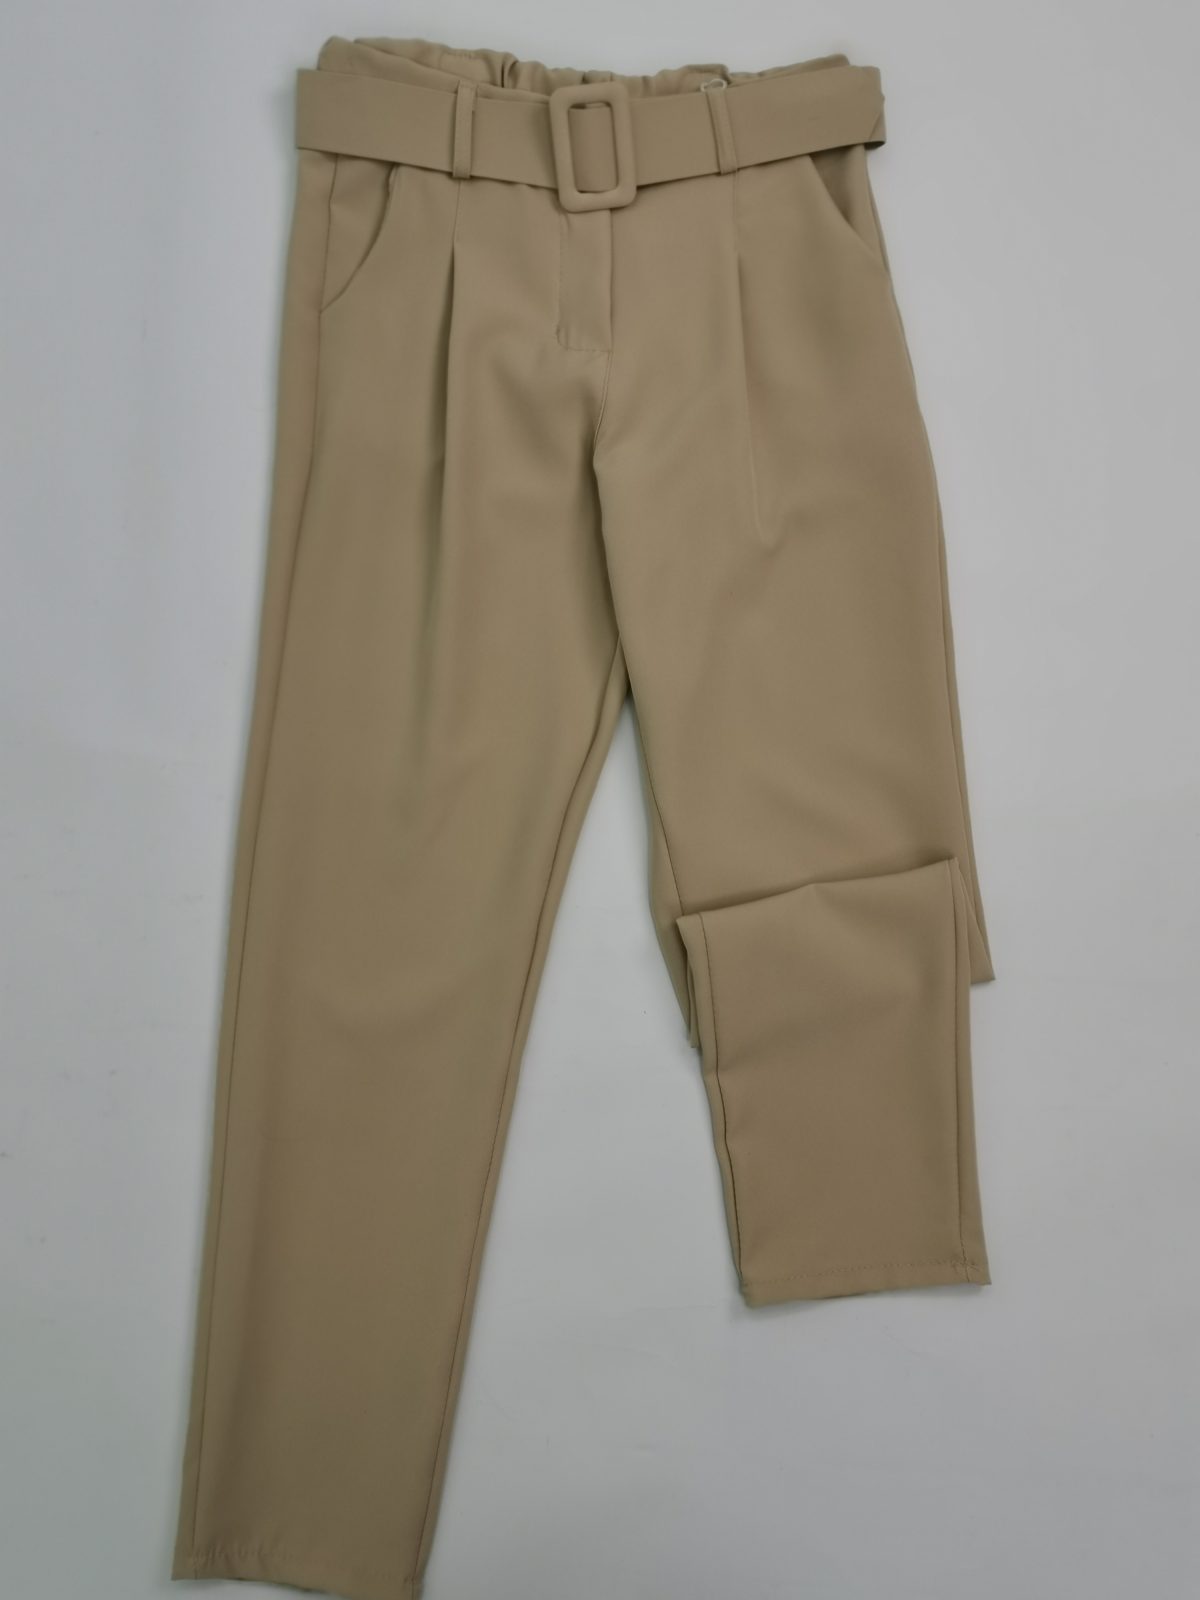 White high-waisted trousers with a beige belt